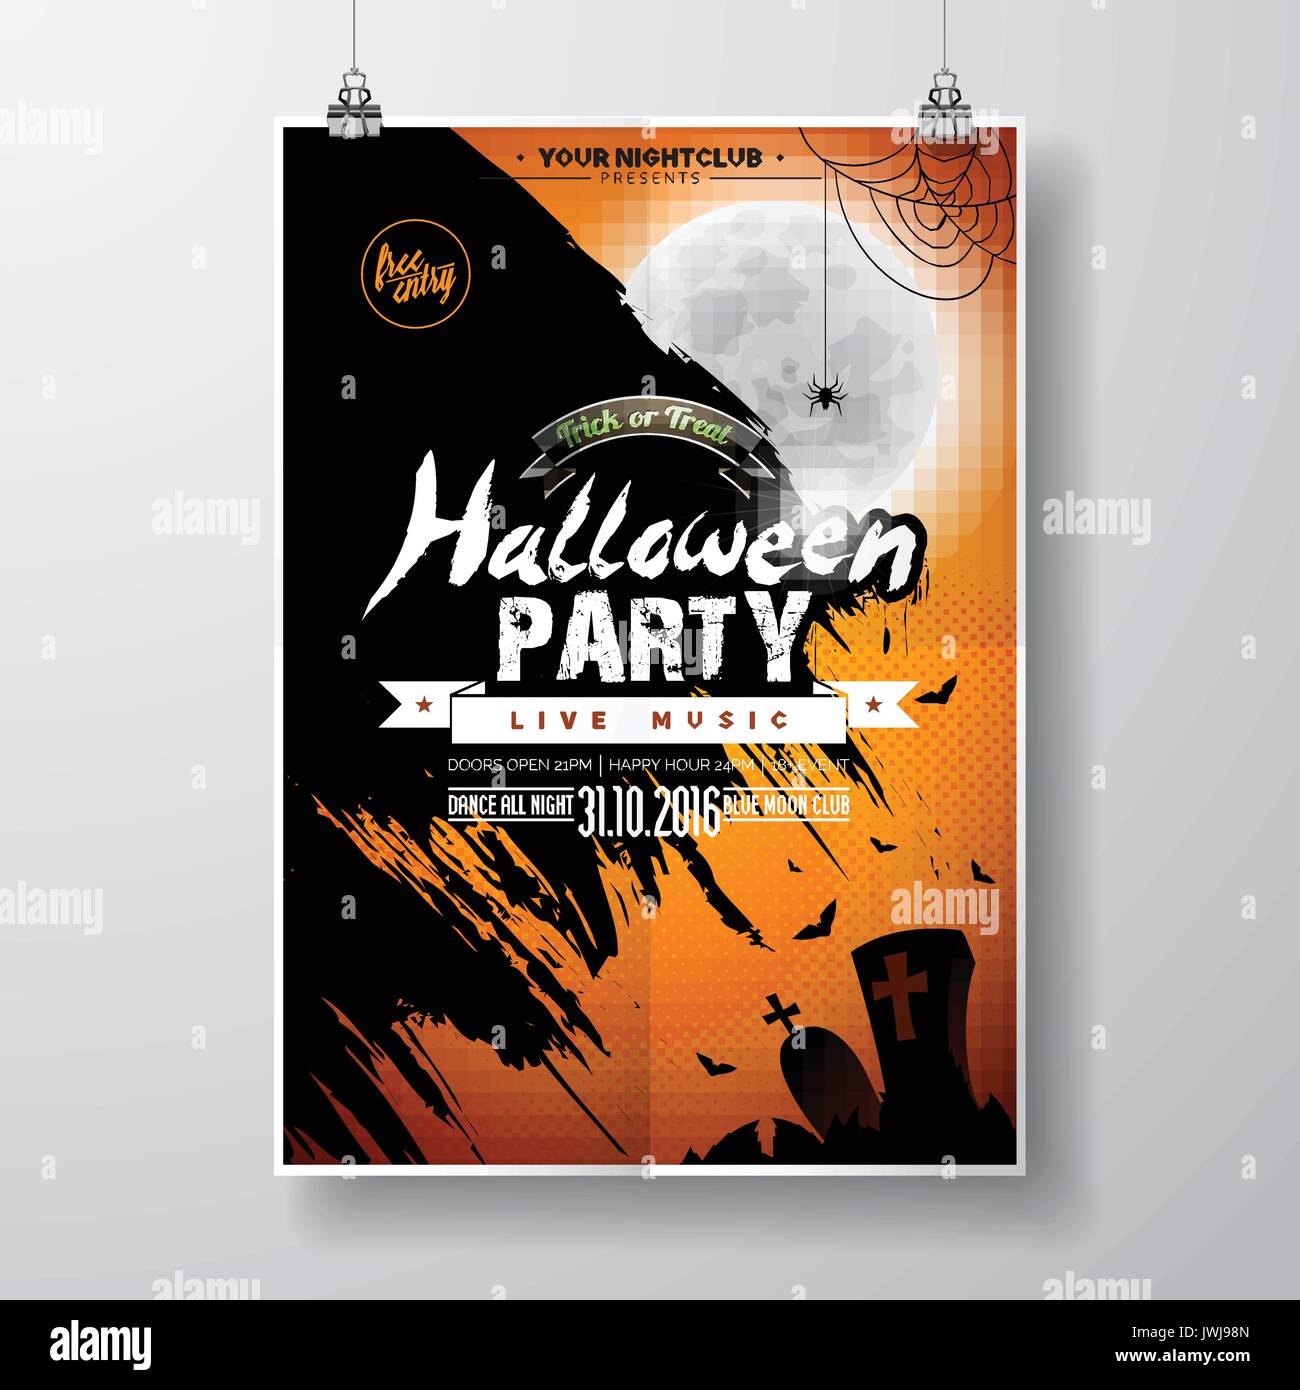 Vector Halloween Party Flyer Design with typographic elements on orange background. Graves, bats and moon. Eps10 illustration. Stock Vector